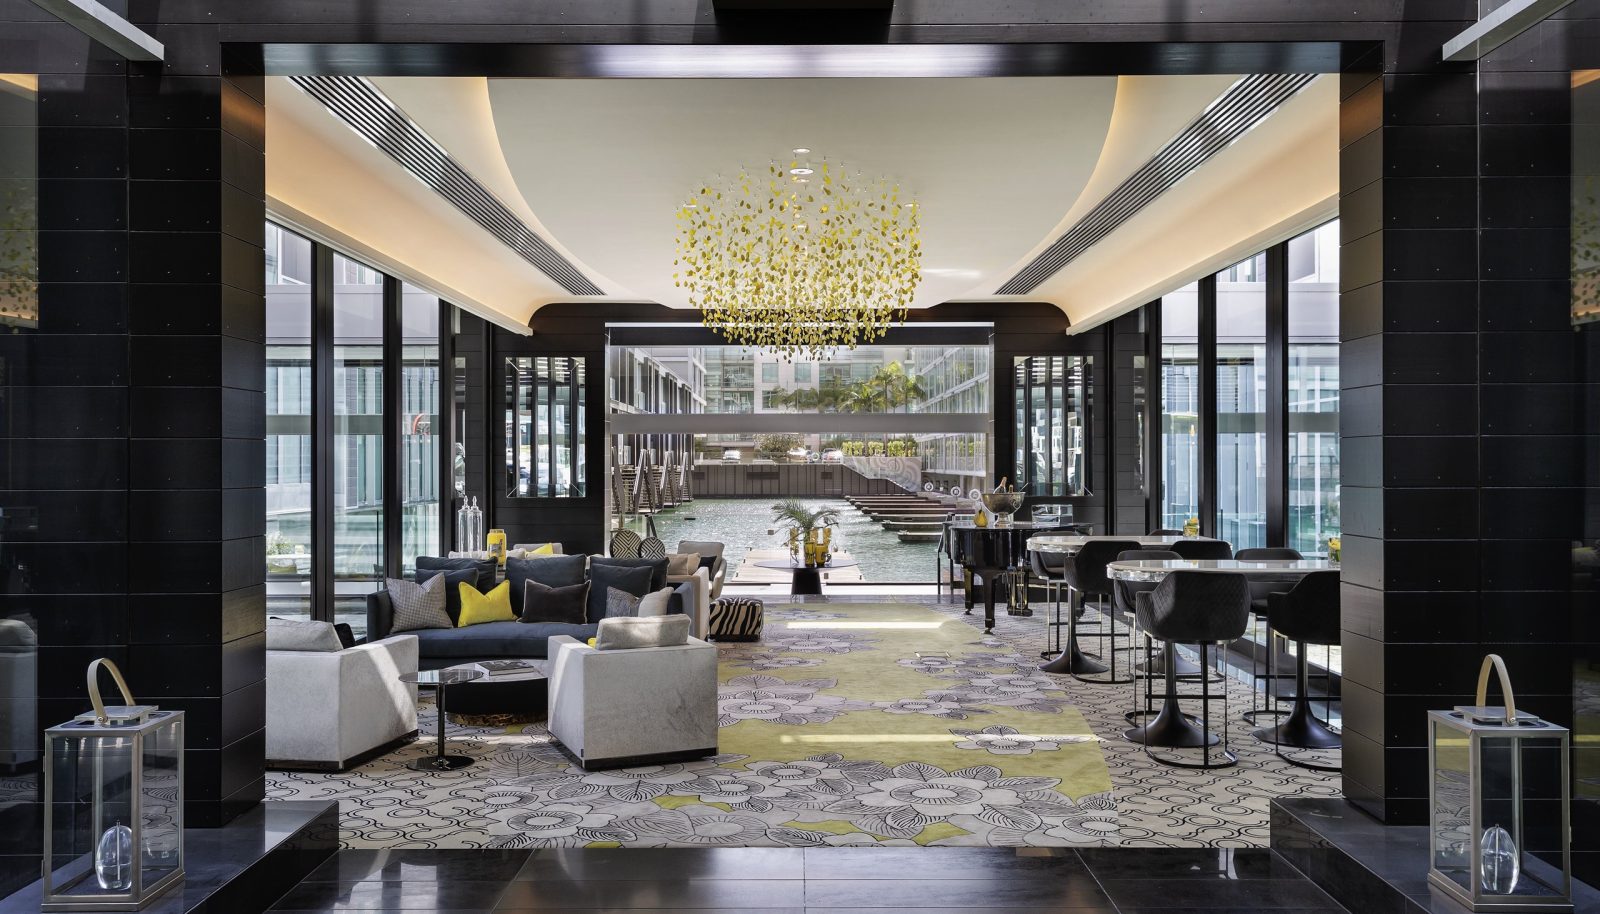 The lobby at the Sofitel Auckland Viaduct Harbour